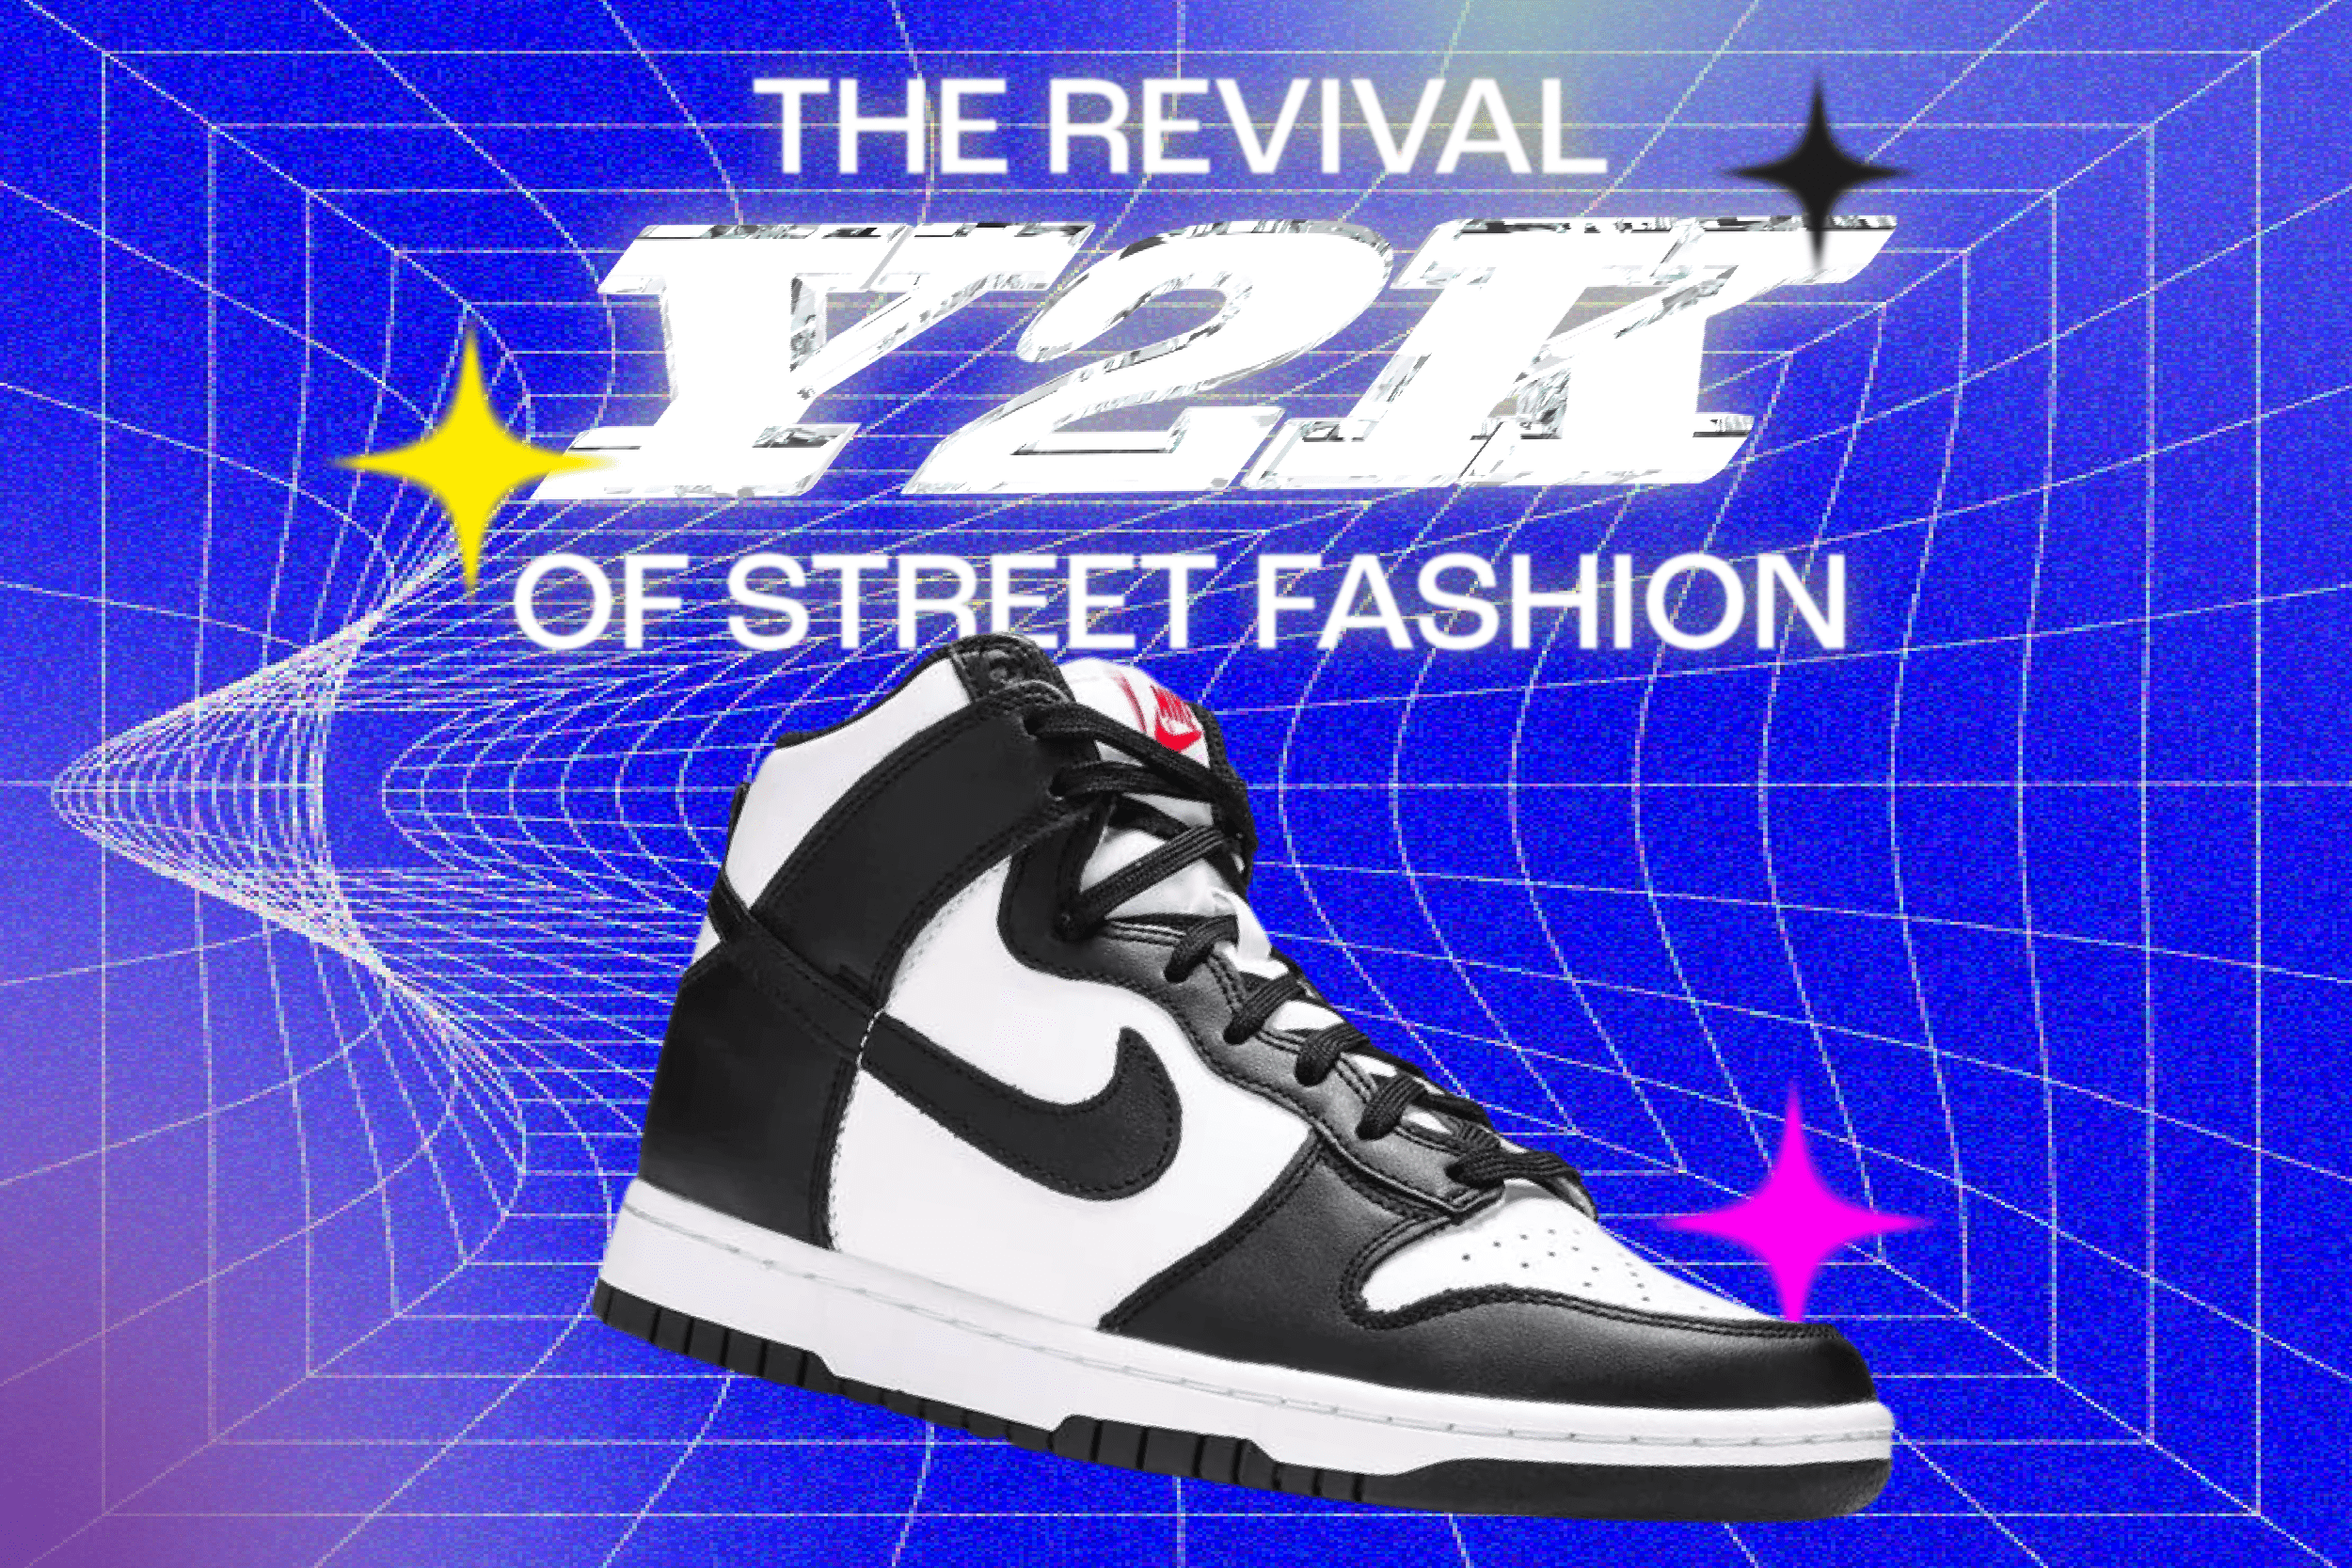 The Revival Y2K of Street Fashion!  